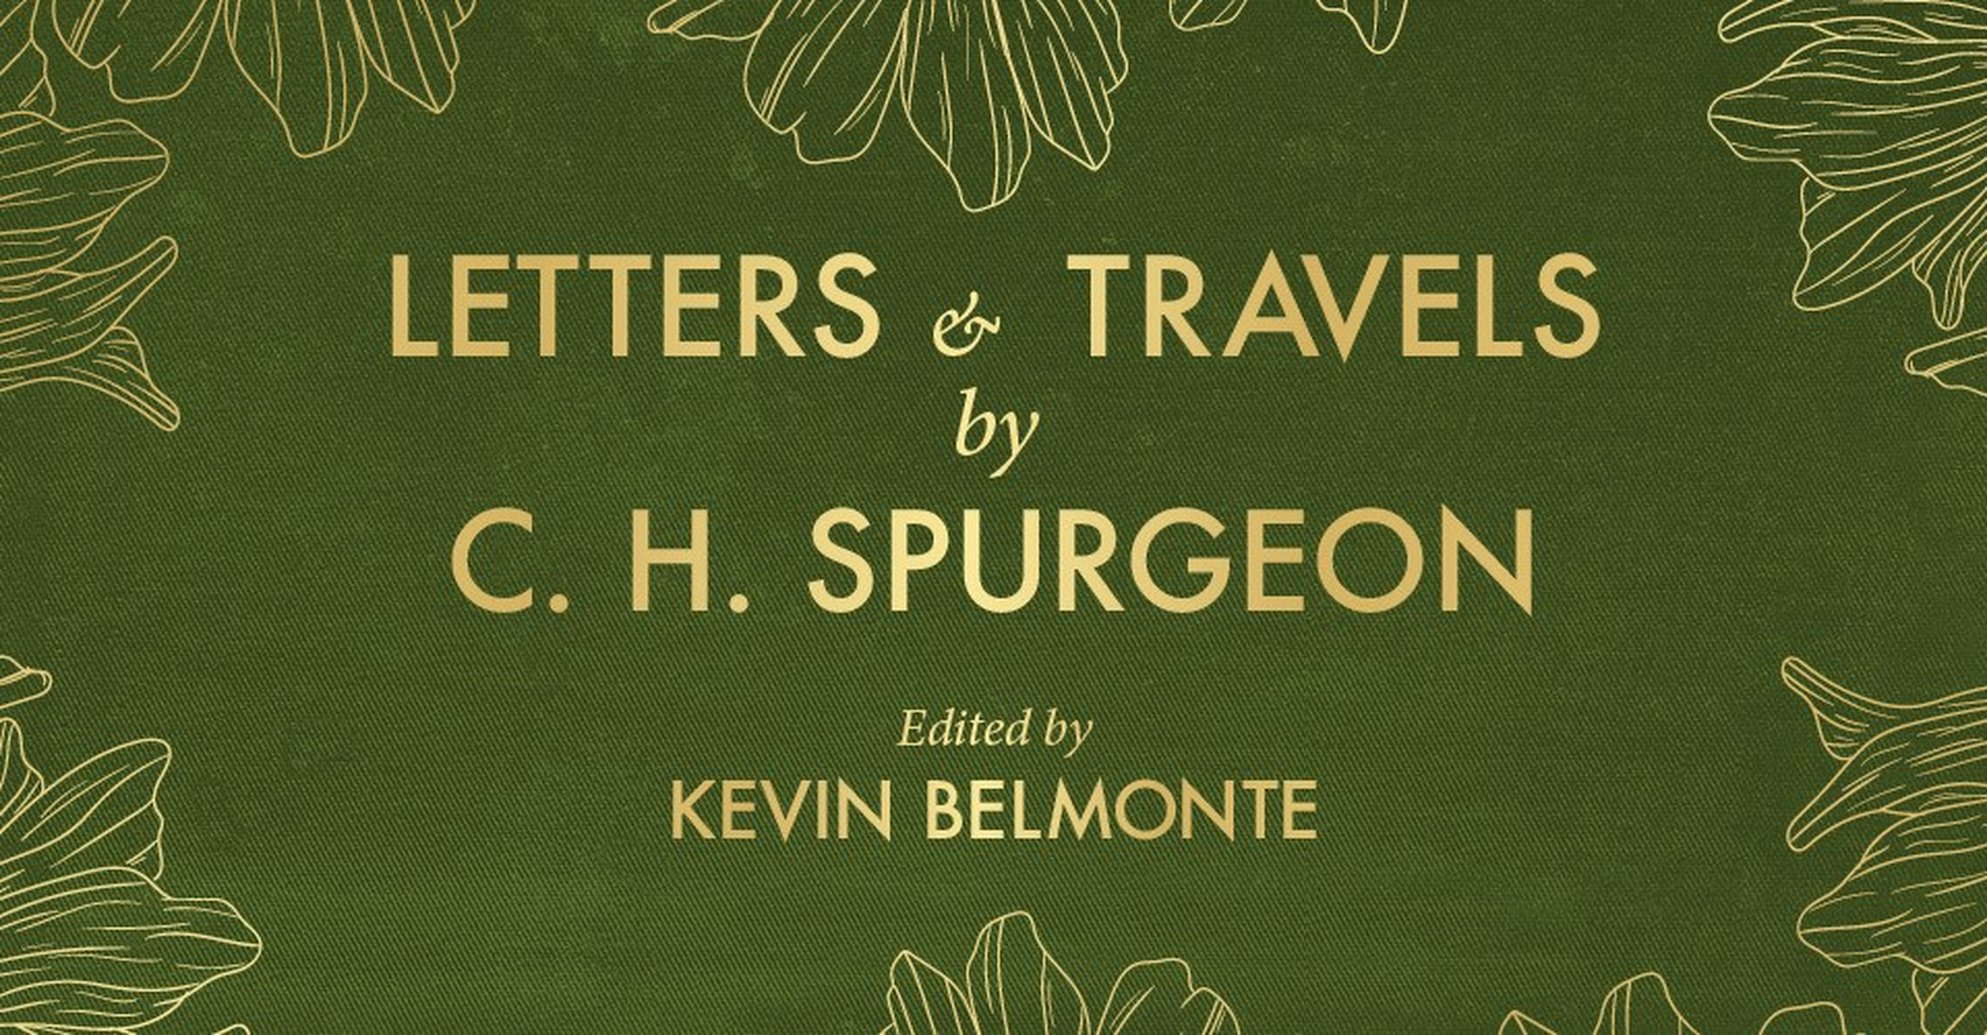 Letters & Travels by C.H. Spurgeon